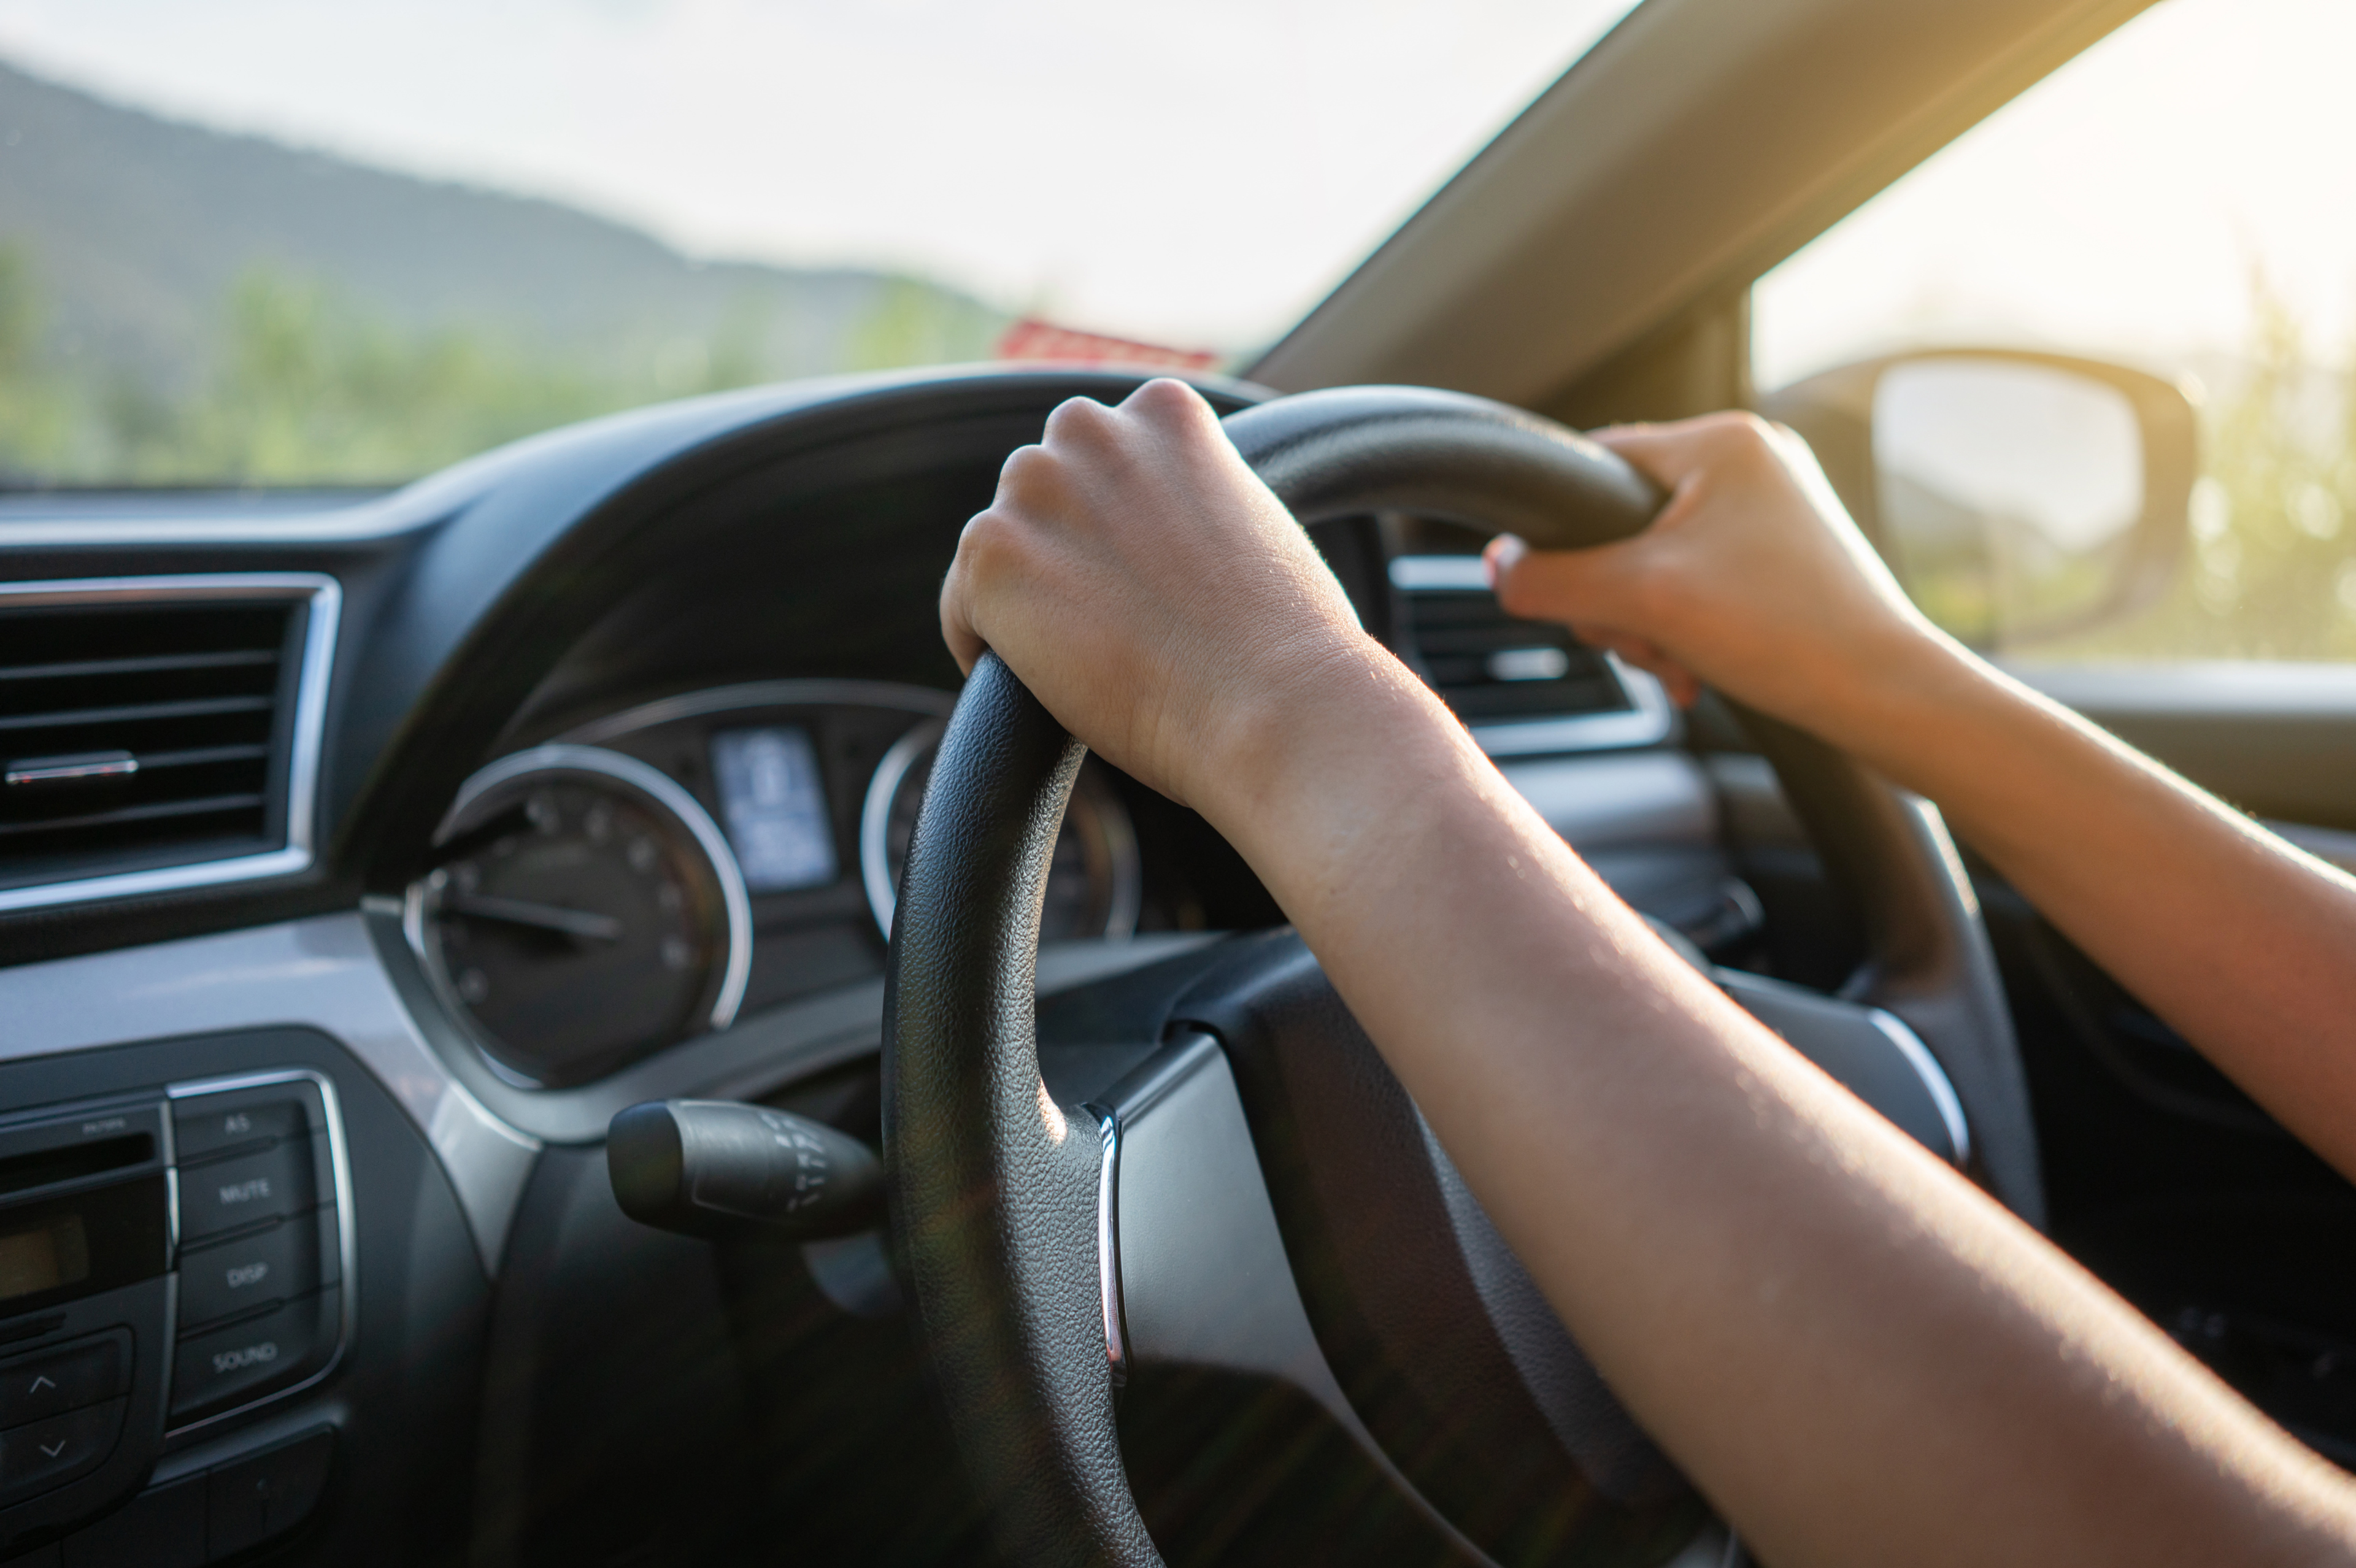 Adjust your driving position so you don't have to strain to reach the steering wheel.